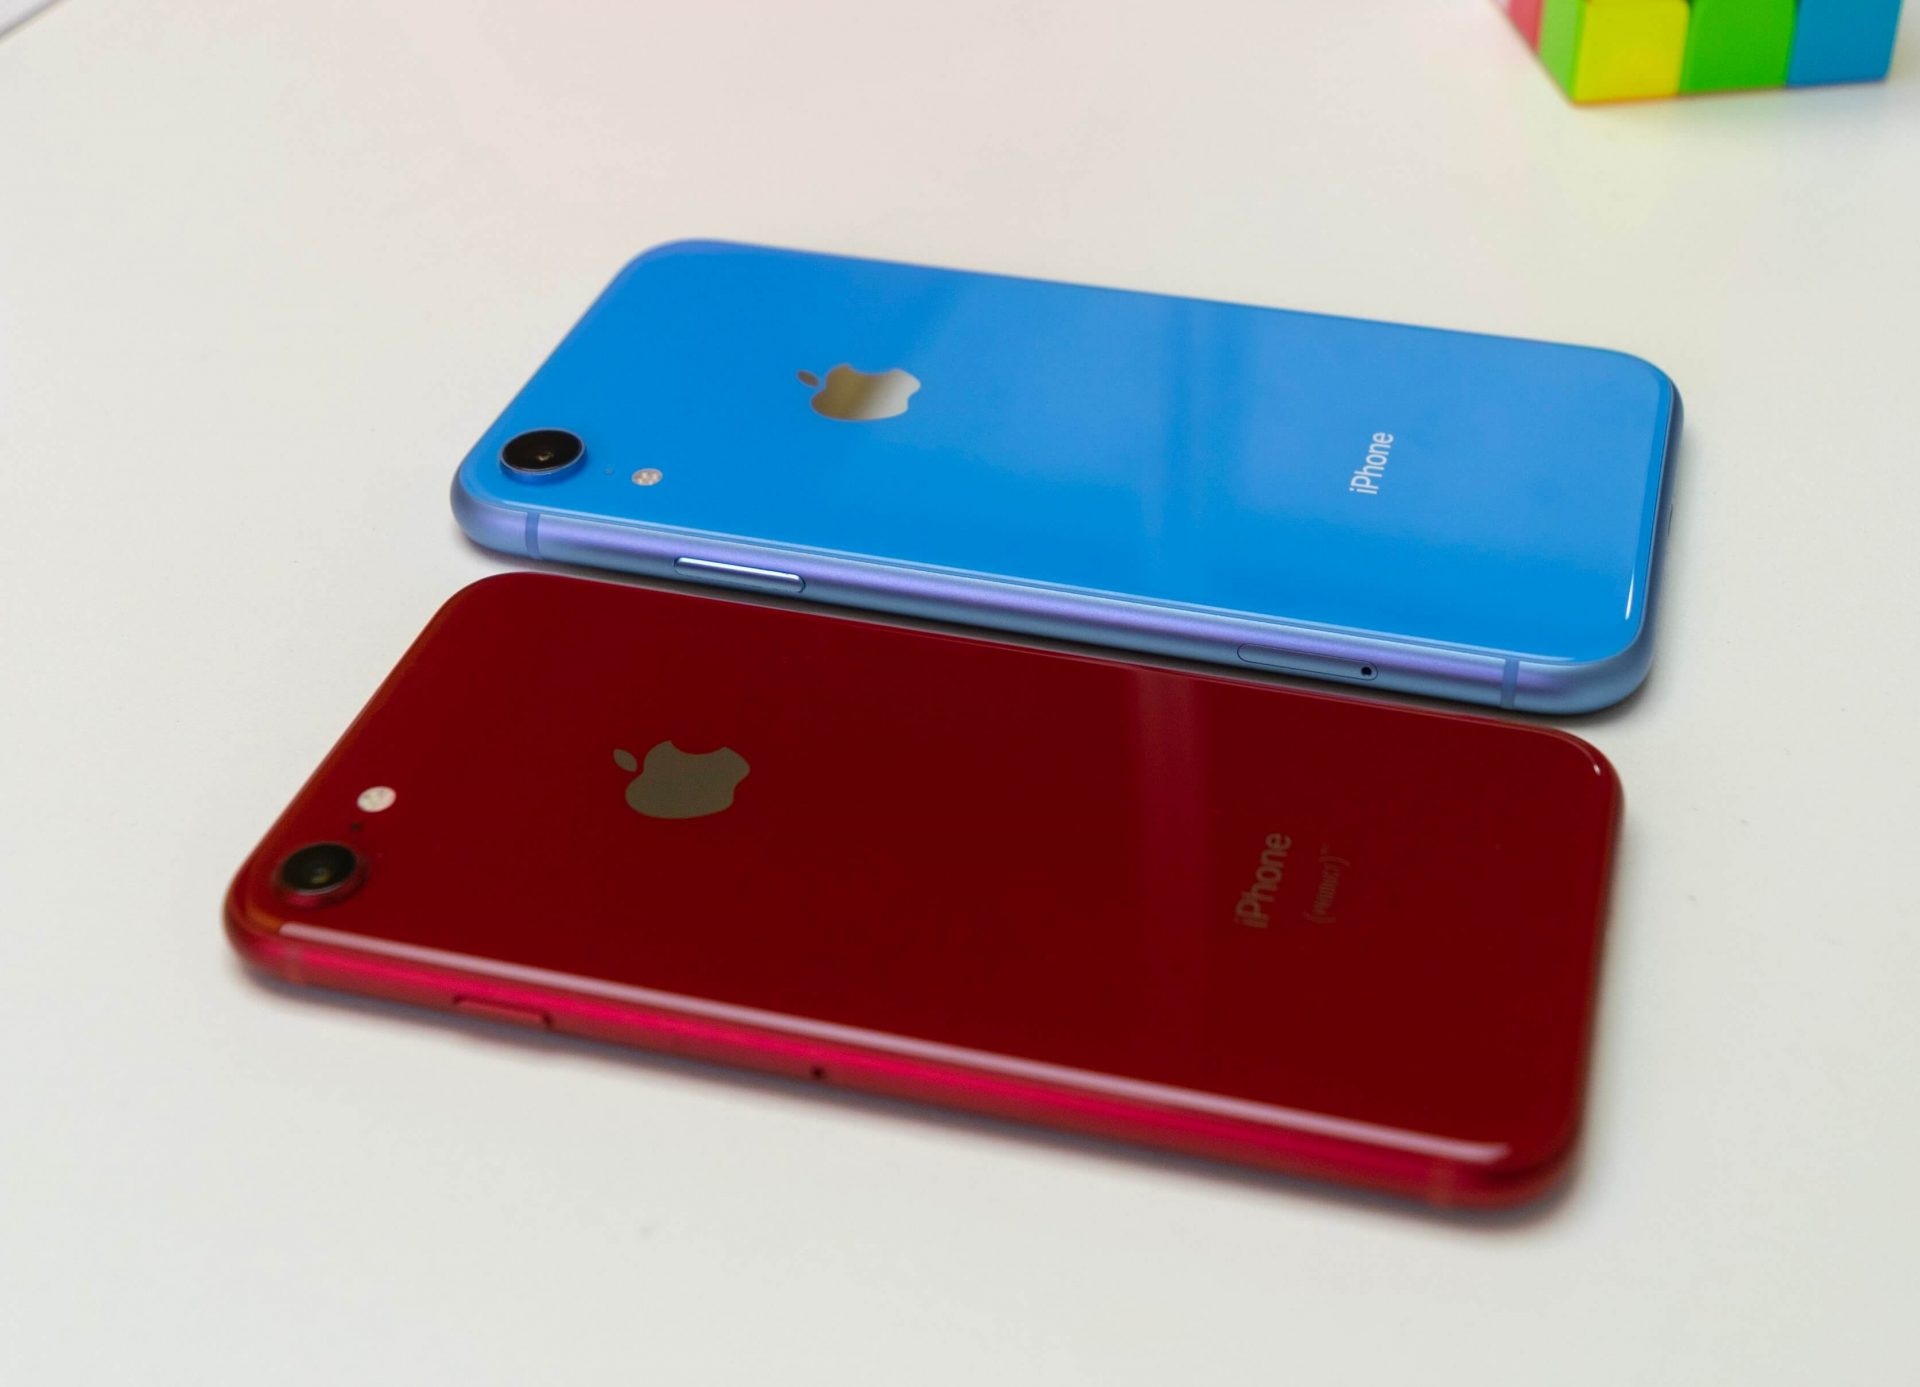 Iphone xr azul e iphone 8 product (red) lado a lado